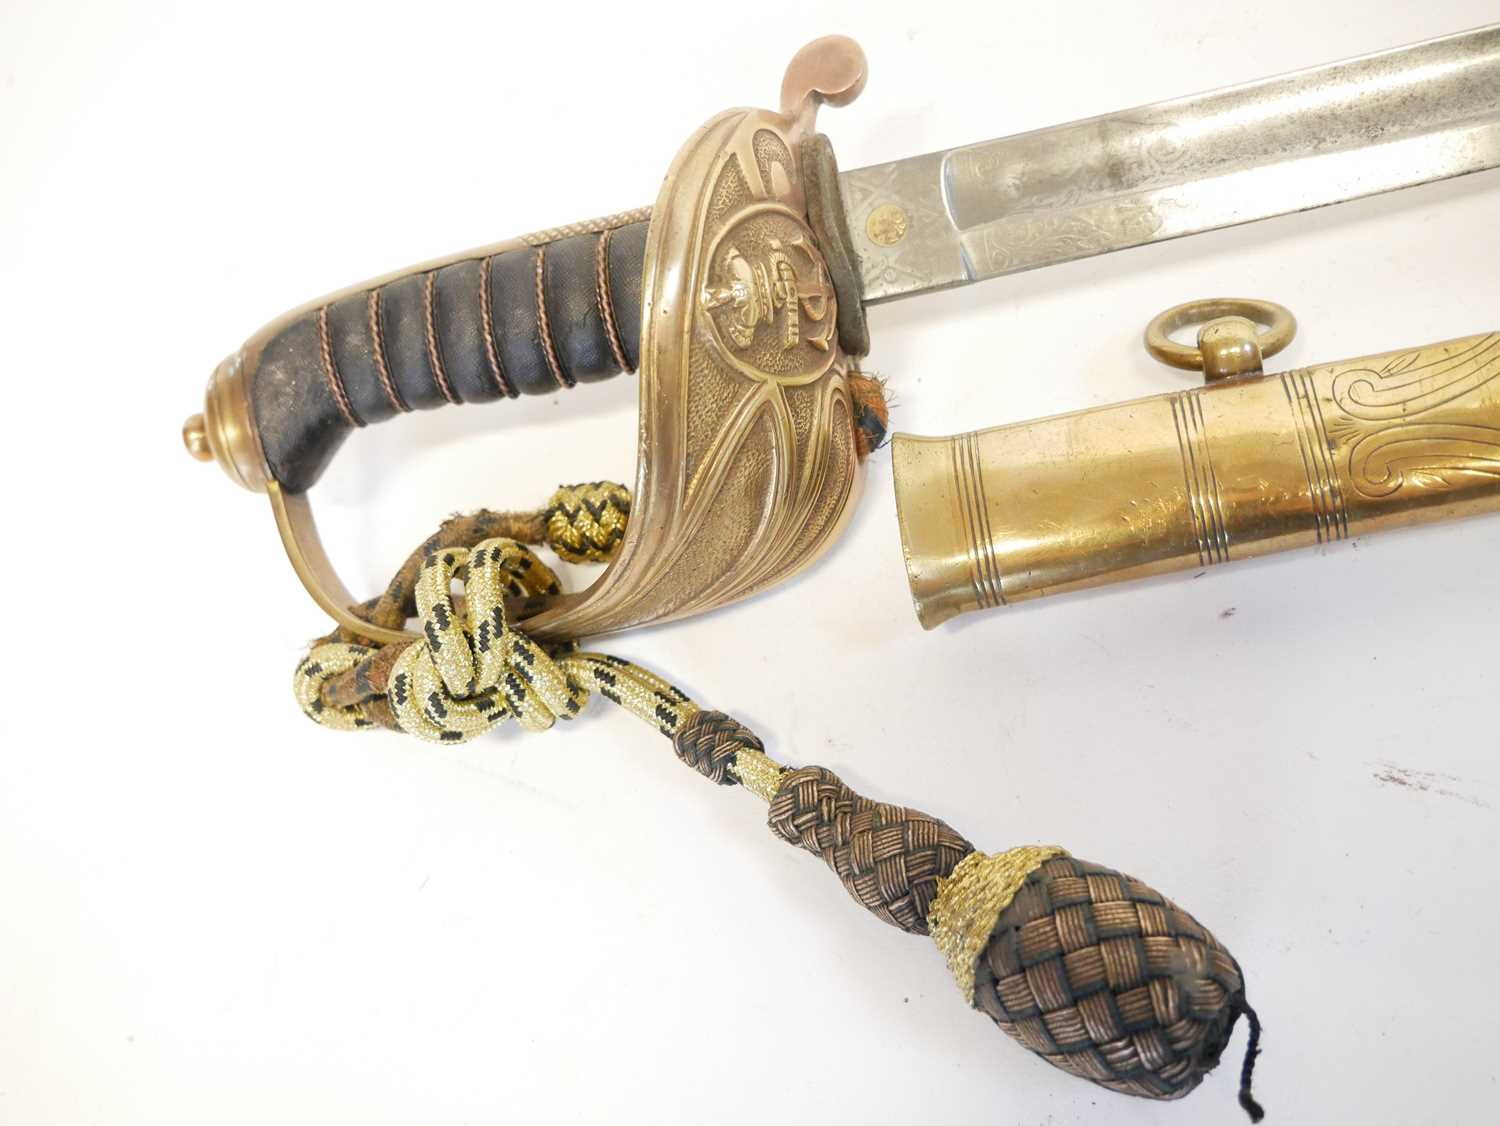 Royal Navy Petty Officer's sword, similar to an 1827 Naval sword but without the lion head pommel, - Image 3 of 16